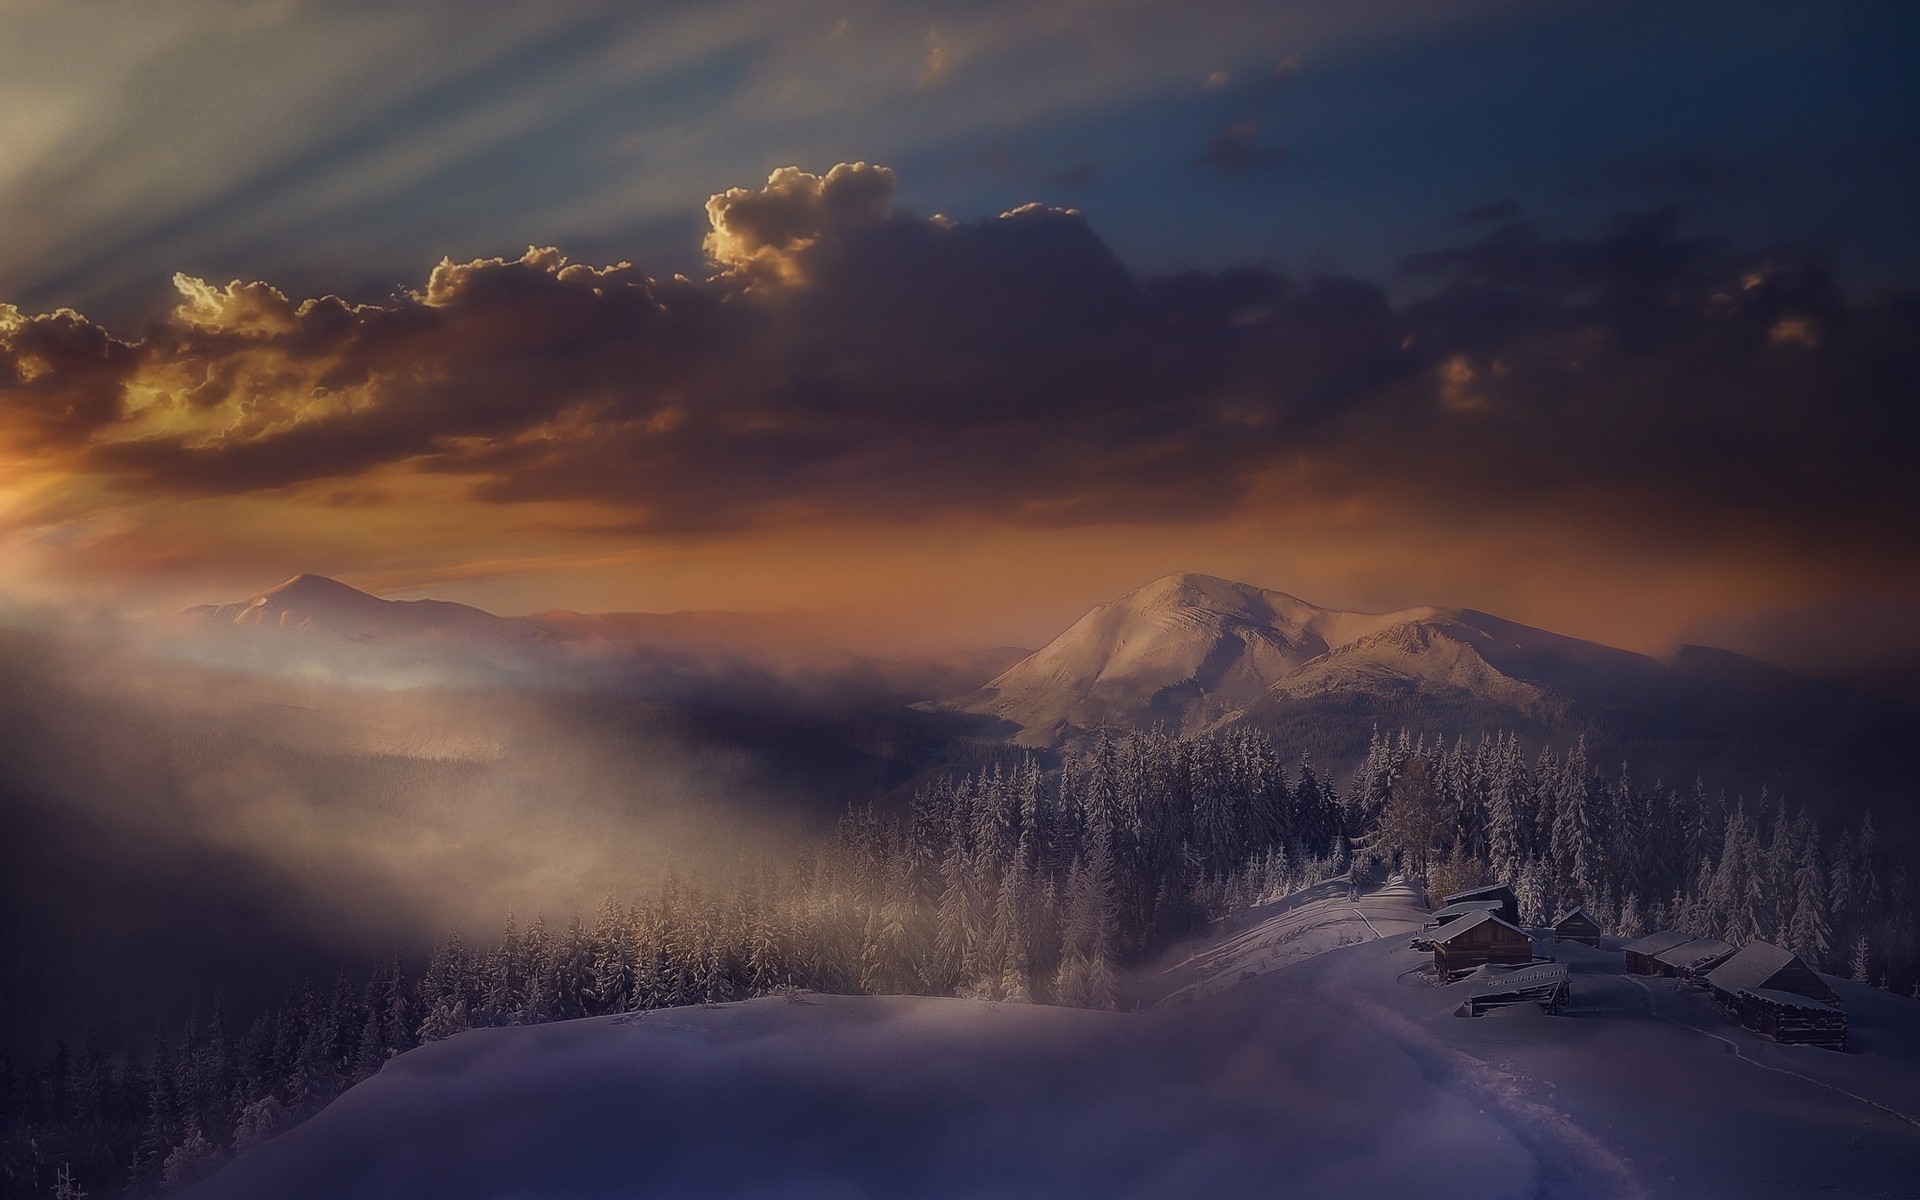 General 1920x1200 landscape nature sunset winter mist Alps mountains cabin Italy sky sunlight forest snow clouds snowy peak snowy mountain